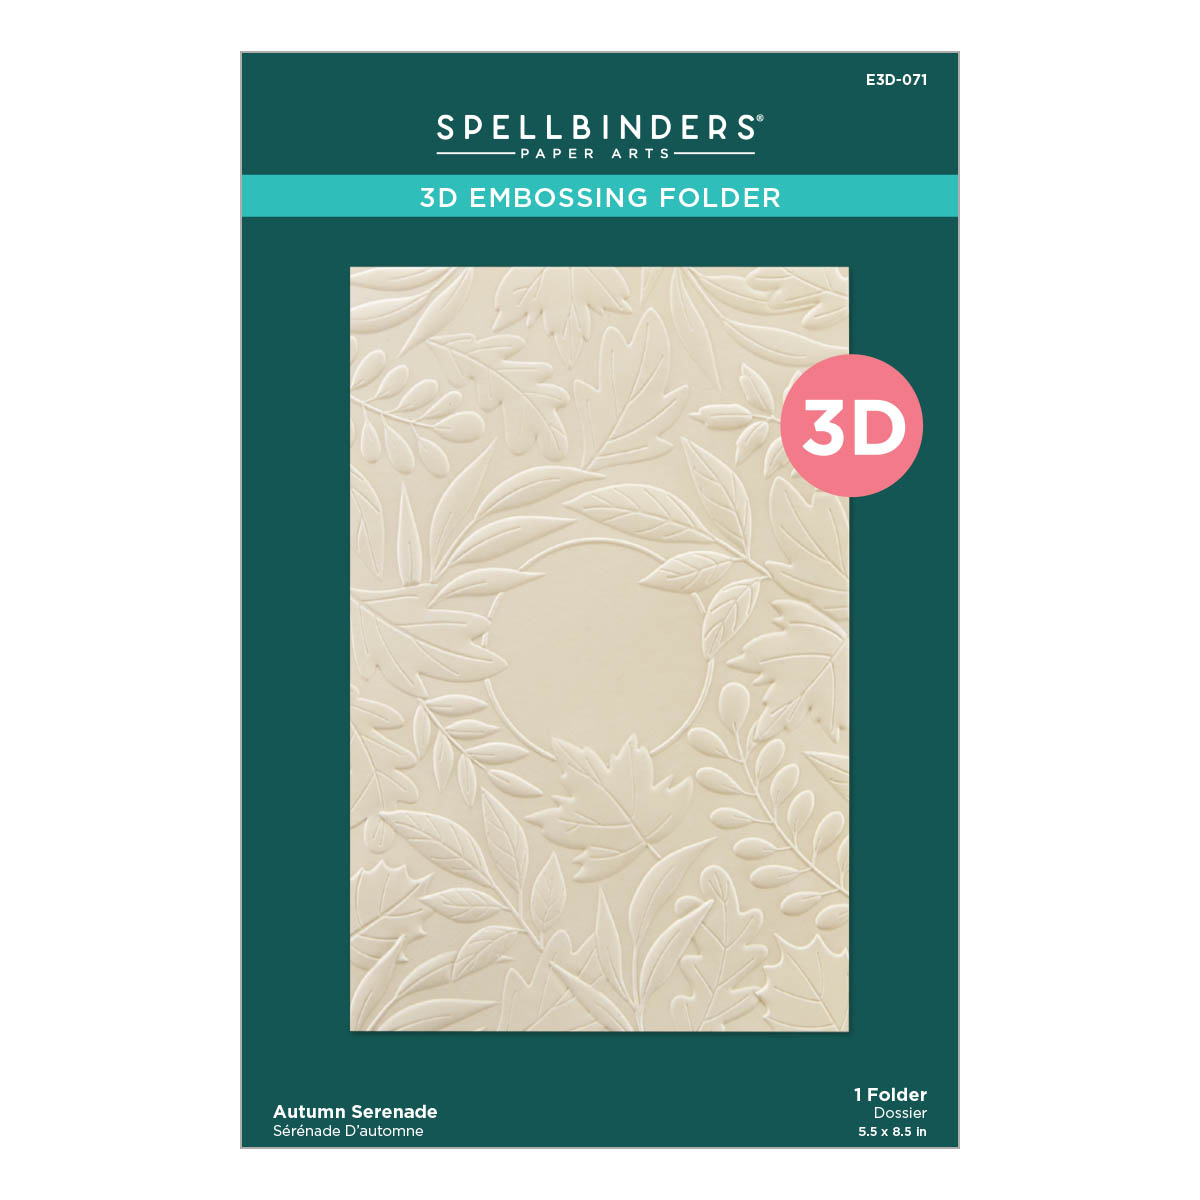 Spellbbinders Autumn Serenade 3D Embossing Folder From the Serenade of Autumn Collection